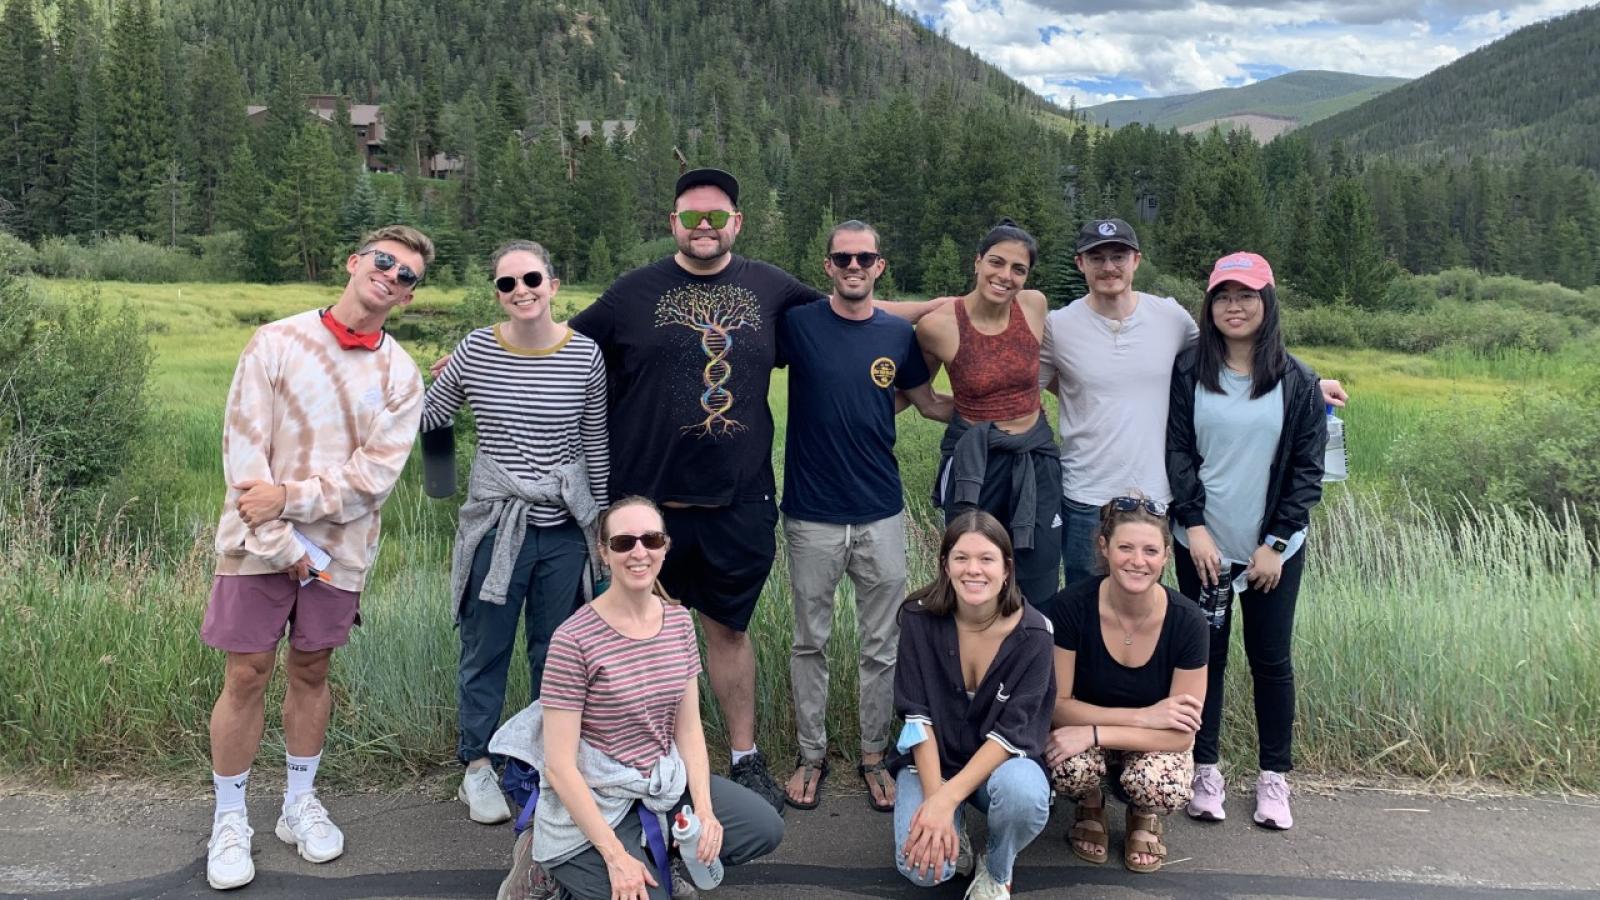 Spencer Lab on a walk during 2022 Lab Retreat in Keystone Colorado. Left to right: (Top) Tim Hoffman, Claire Armstrong, Forrest Shirley, Riley Ill, Varuna Nangia, Victor Passanisi, Yao Rong, (Bottom) Sabrina Spencer, Bri Fernandez, Lotte Watts